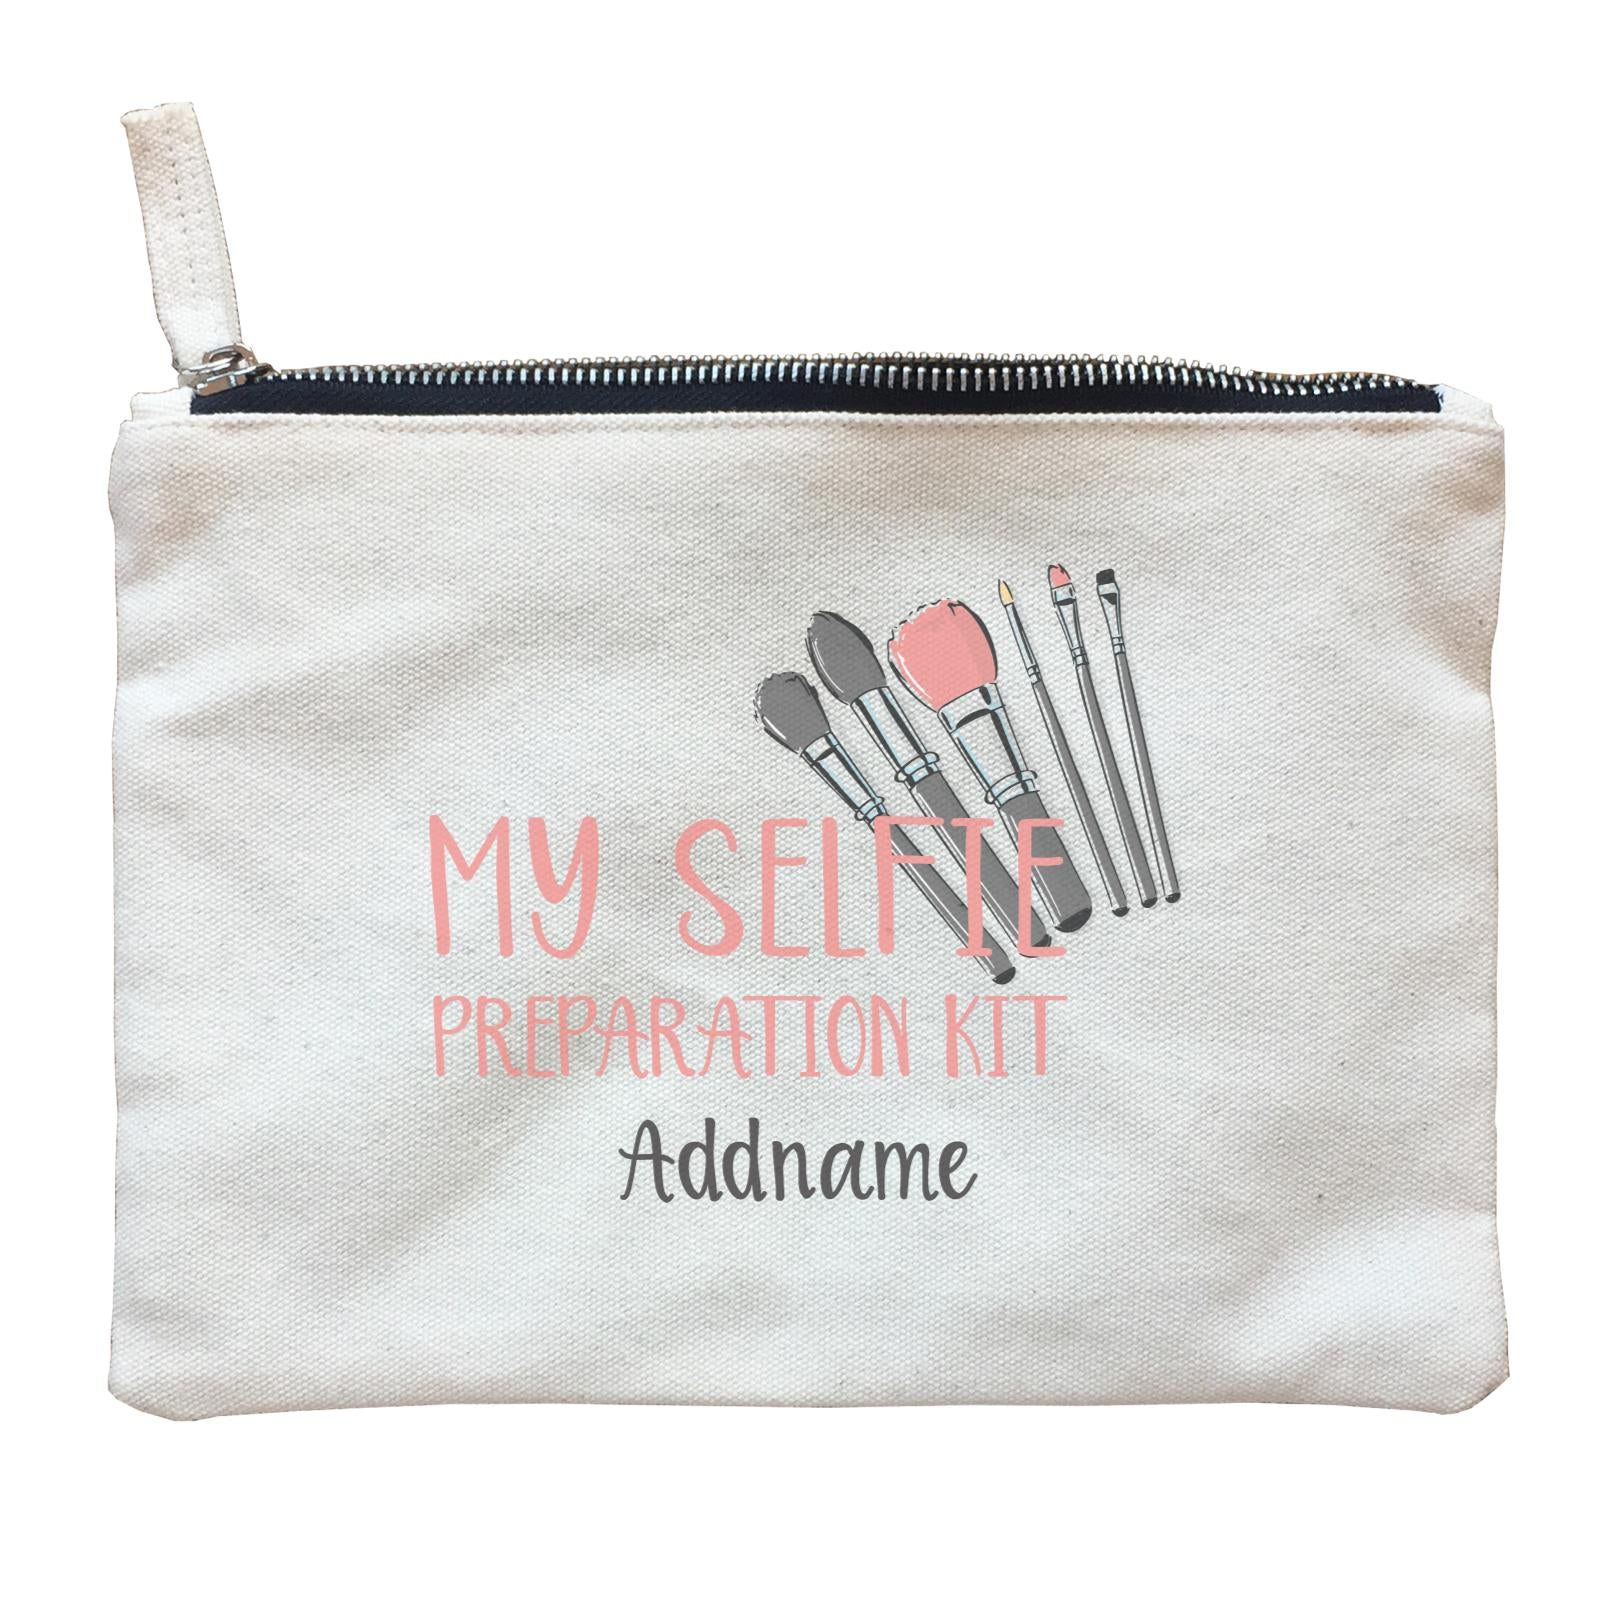 Make Up Quotes My Selfie Preparation Kit Addname Zipper Pouch